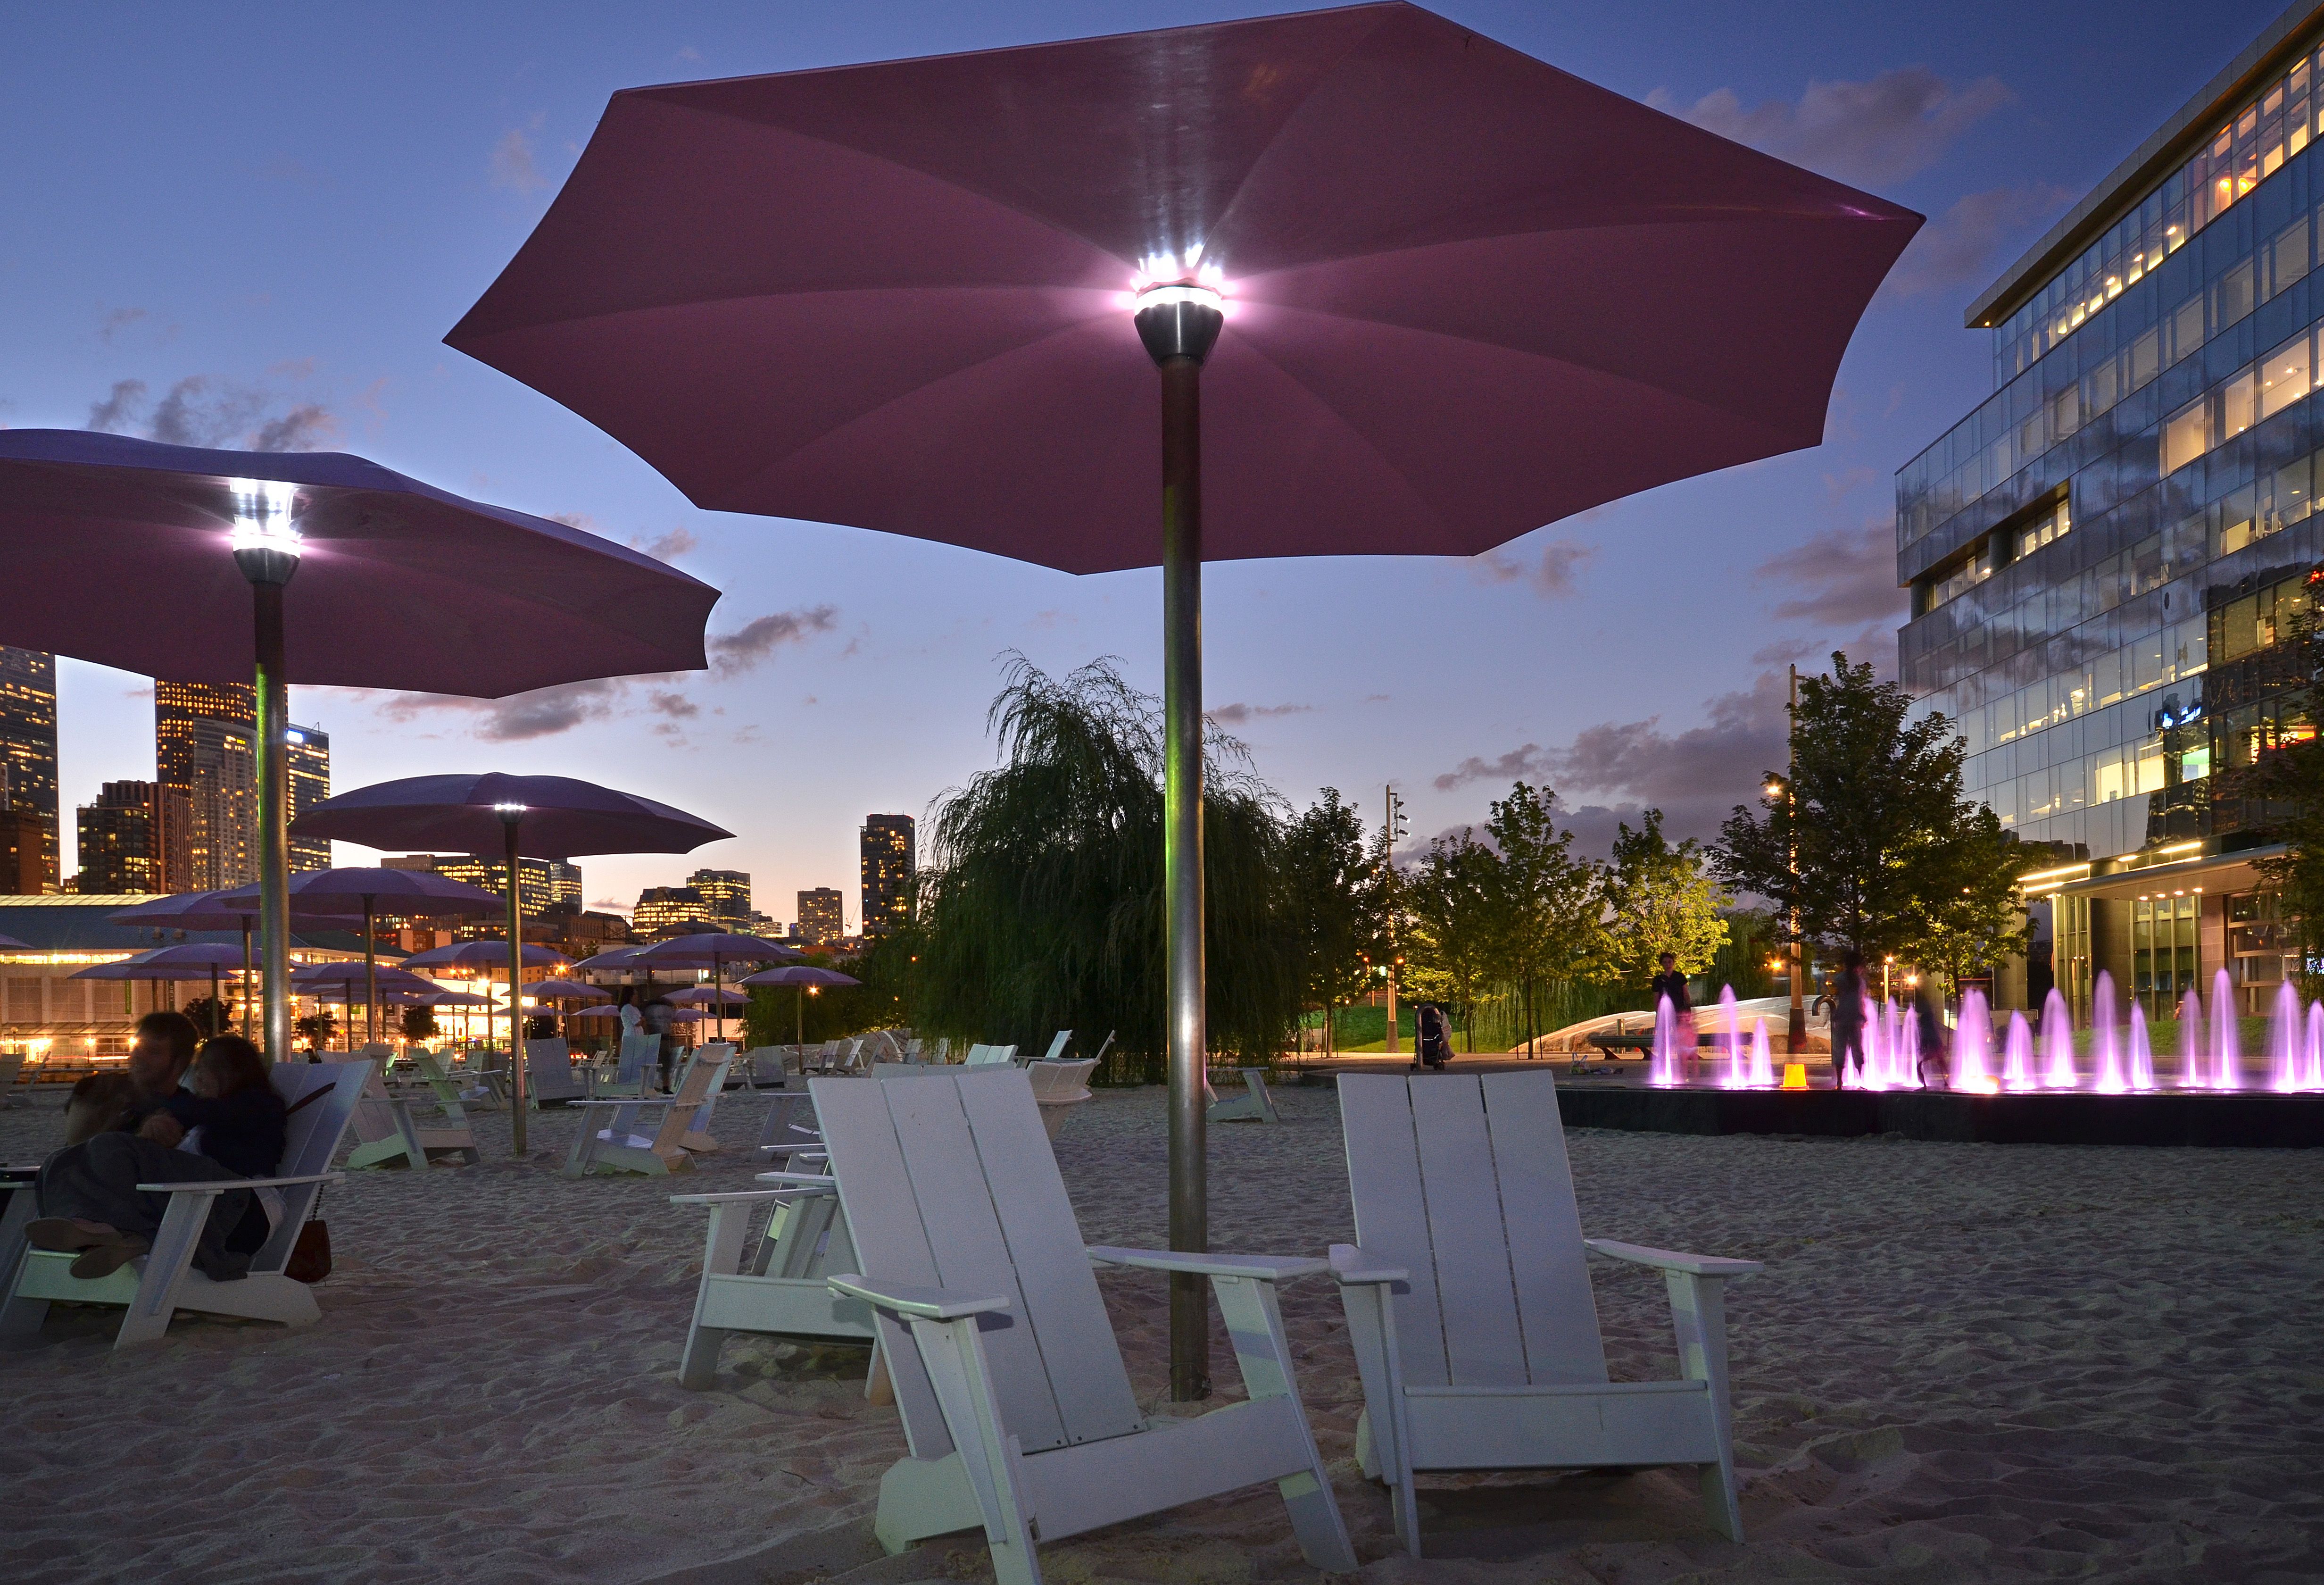 showing pink umbrellas, white Muskoka chairs and sandy beach lit up at dusk